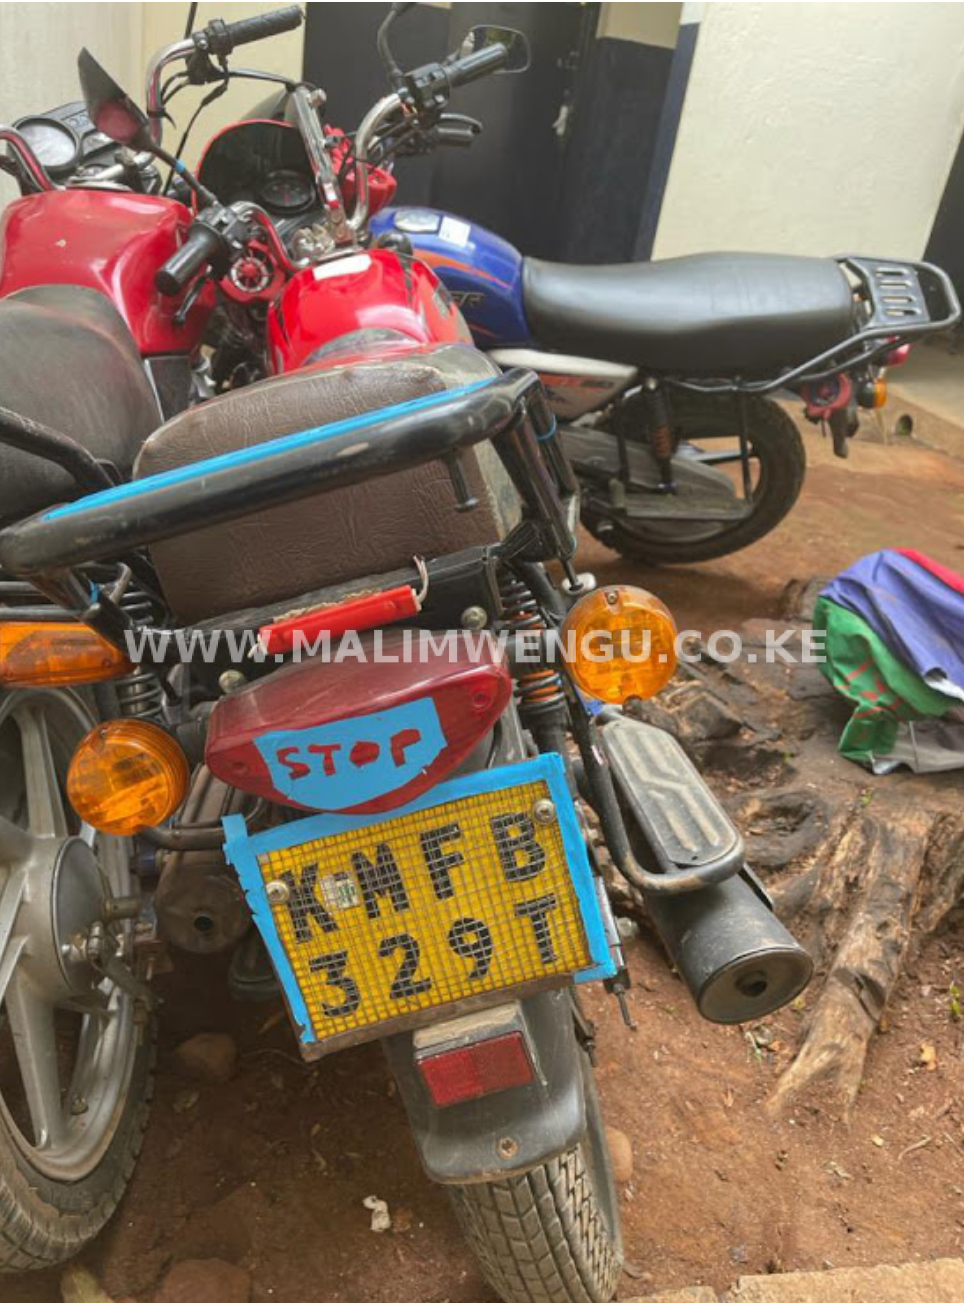 Motorcycle recovered